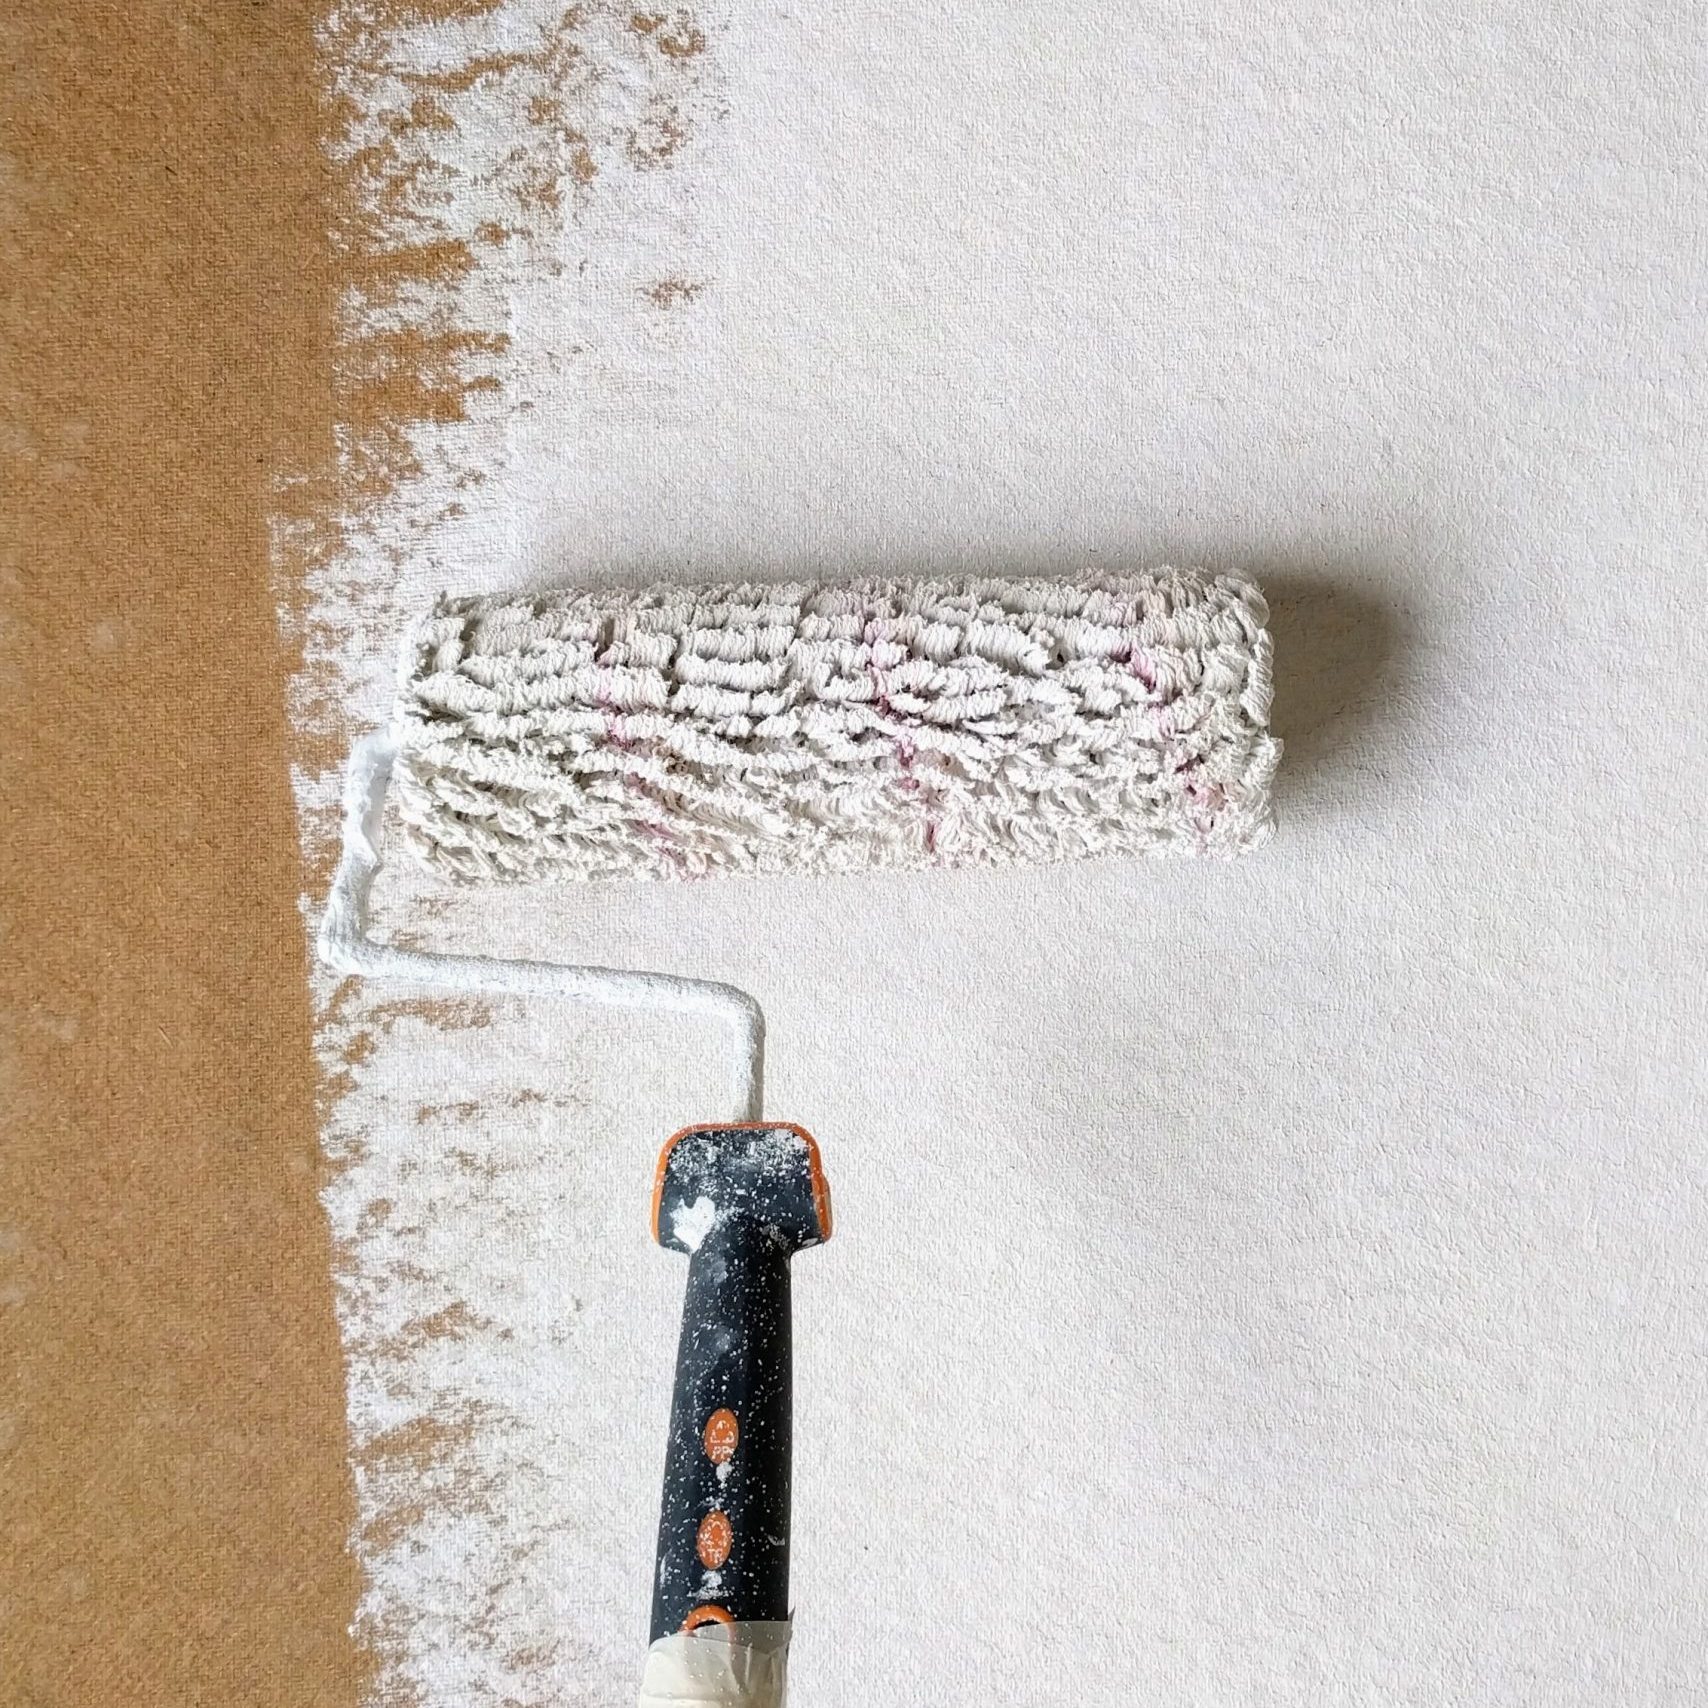 Textured Surfaces Paint Rollers at